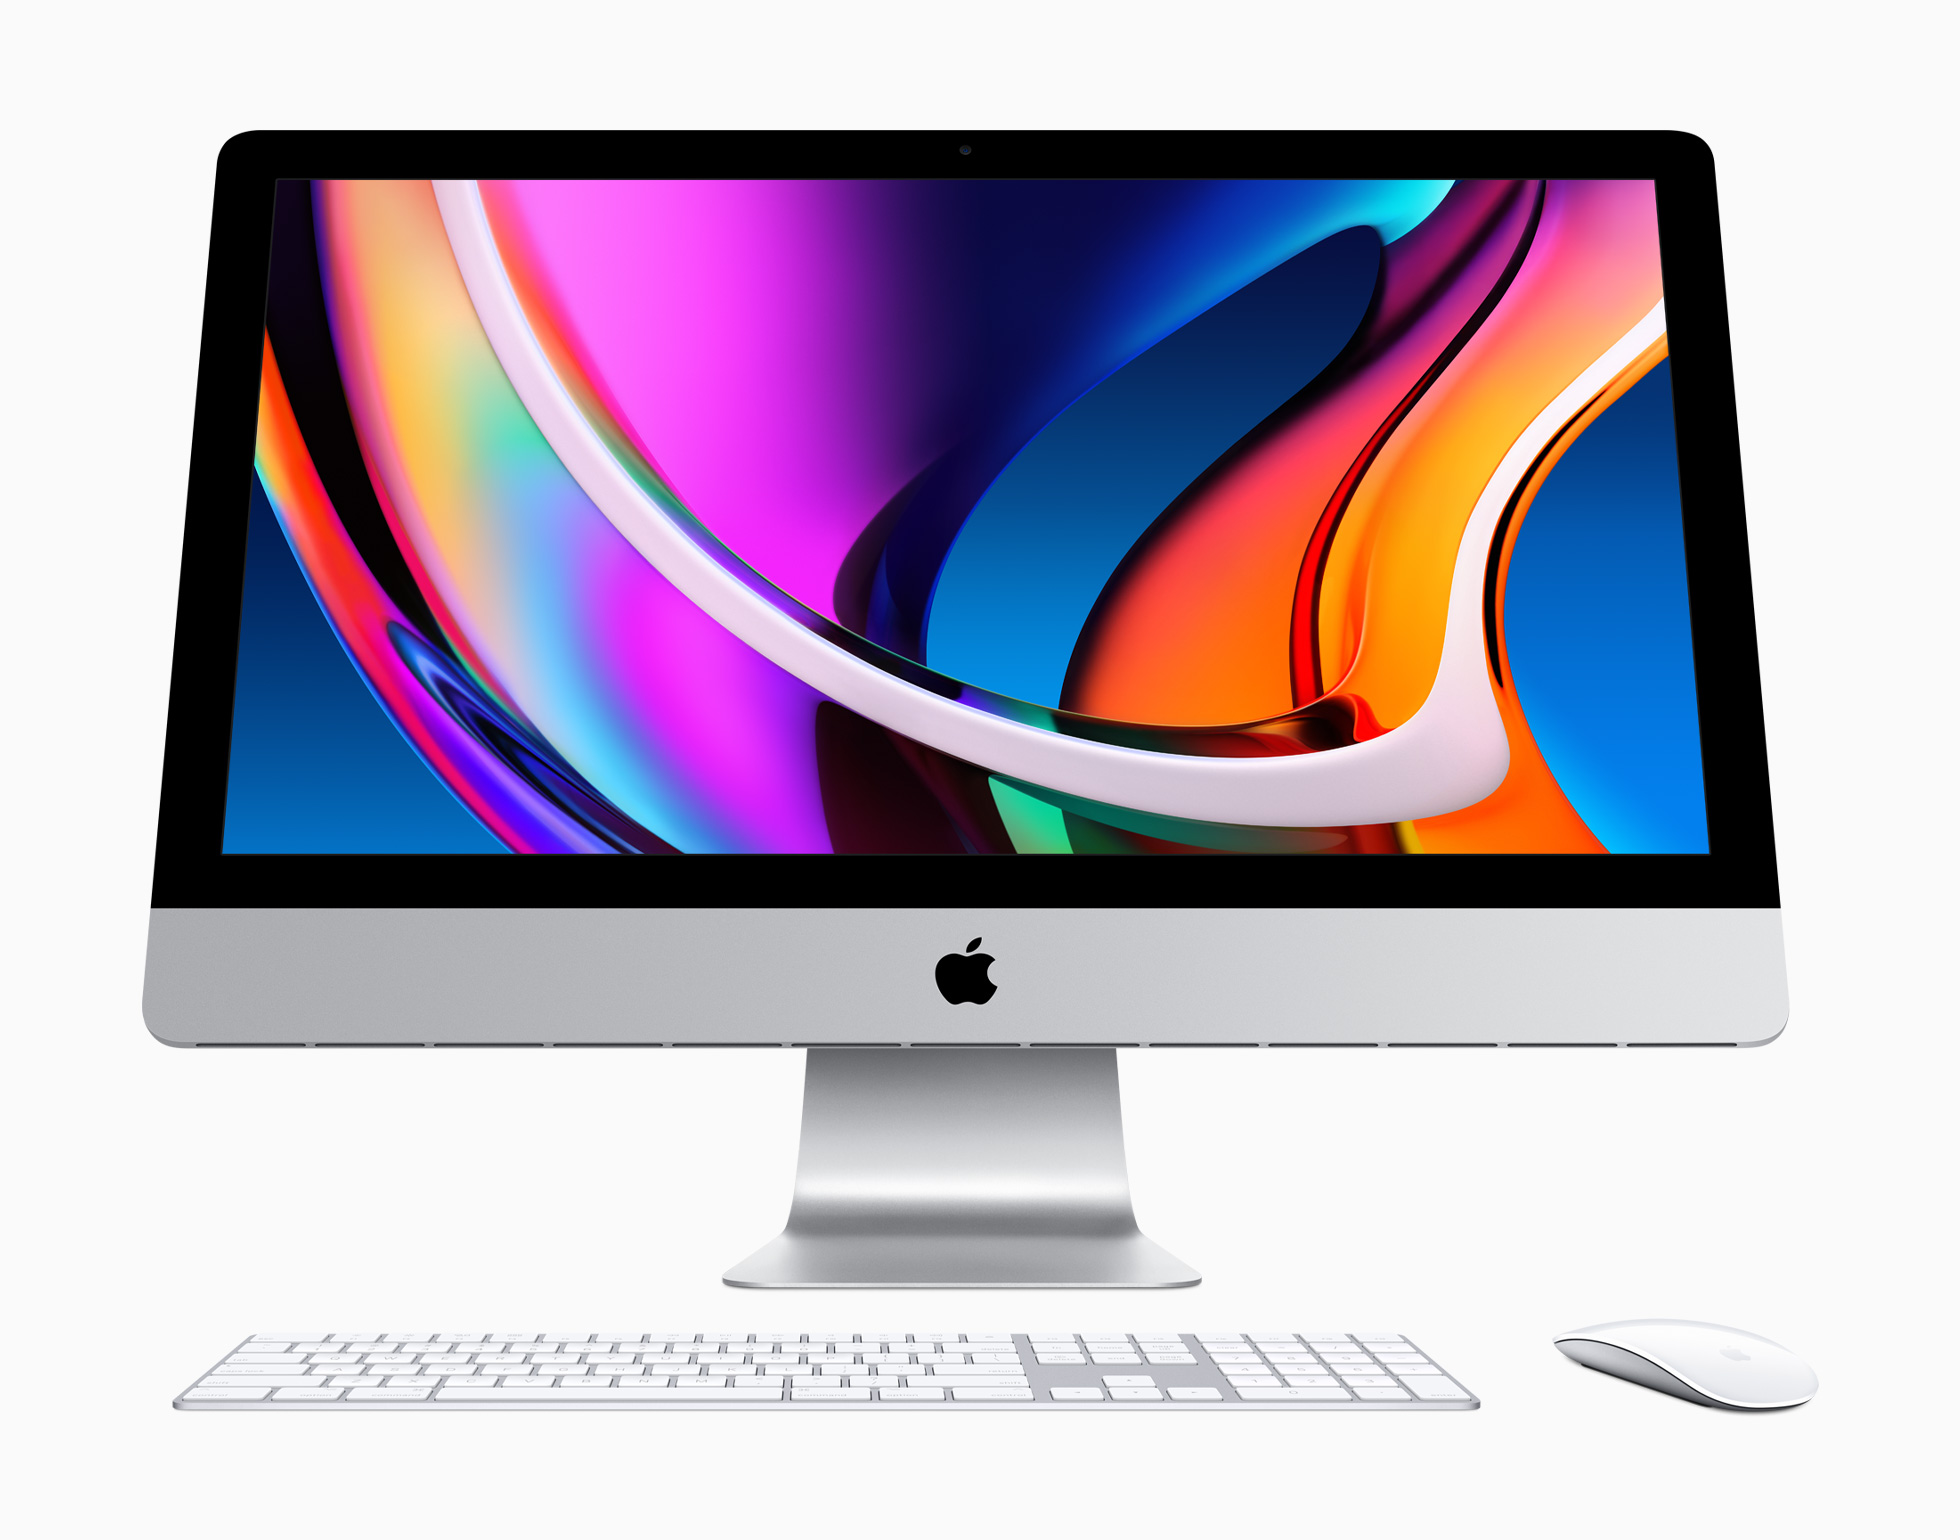 iMac Pro gets Update in SSD, CPU, Display, and More...